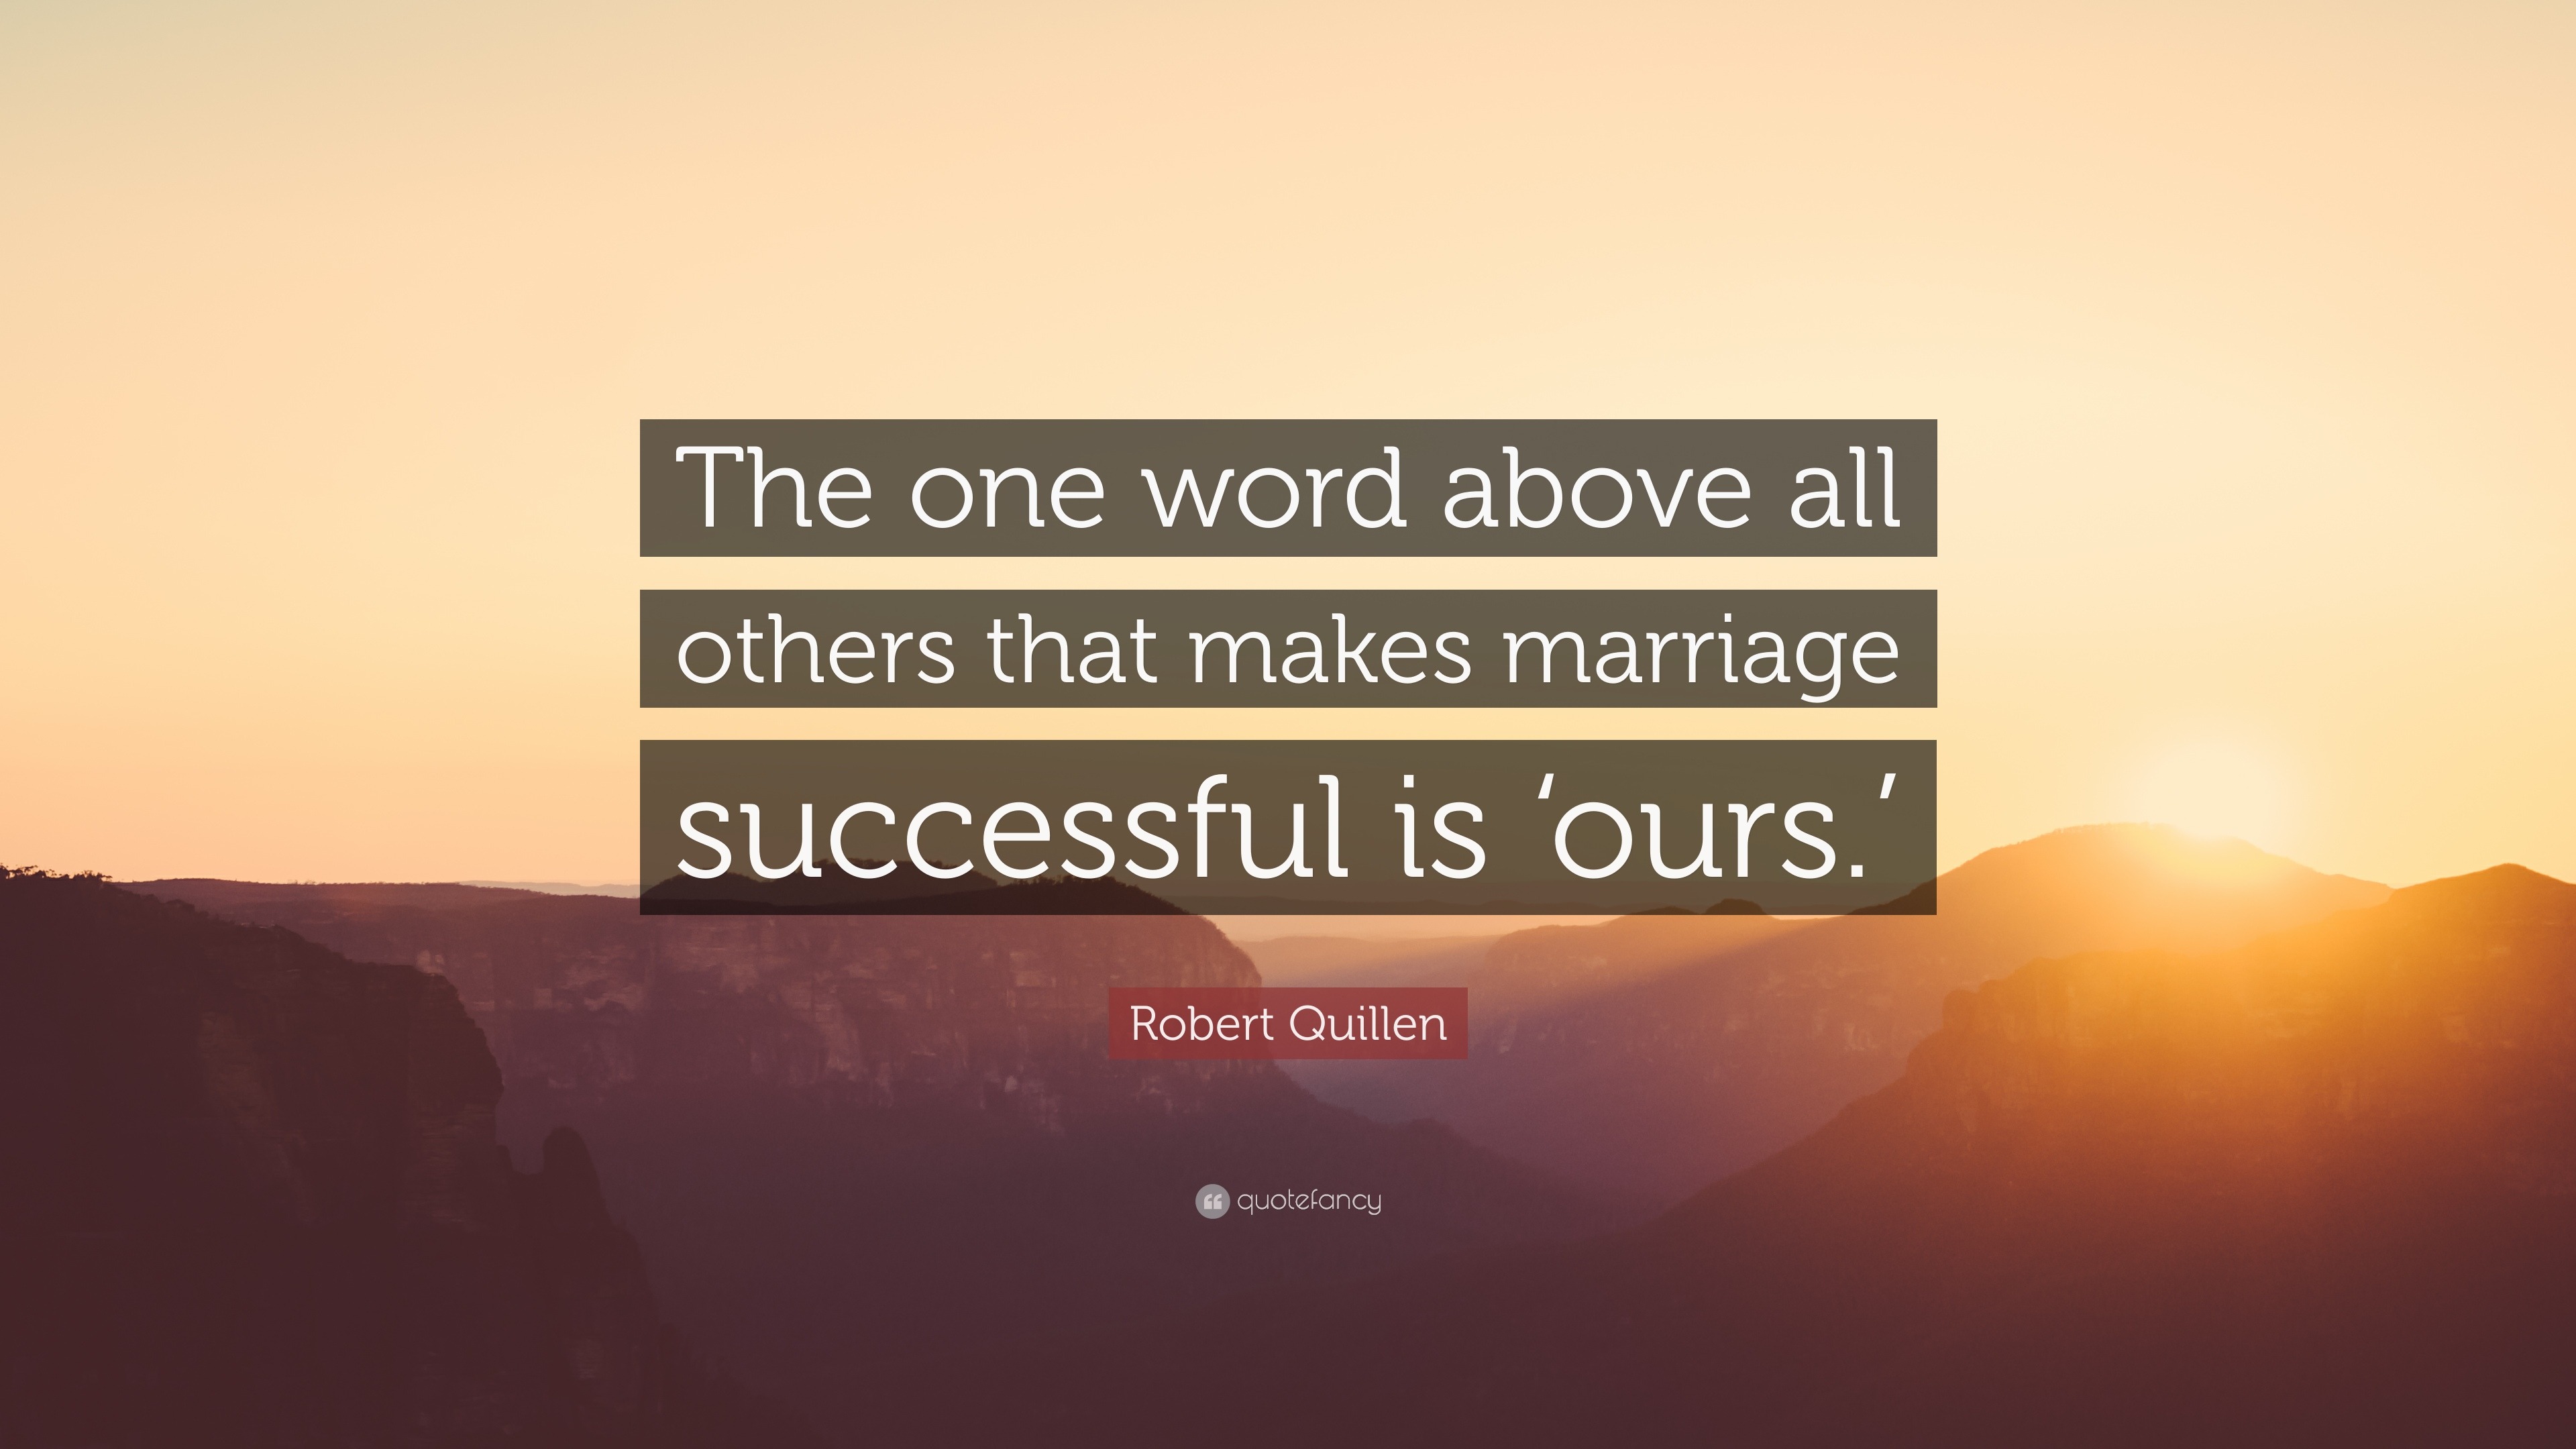 Robert Quillen Quote: “The one word above all others that makes marriage  successful is 'ours.'”